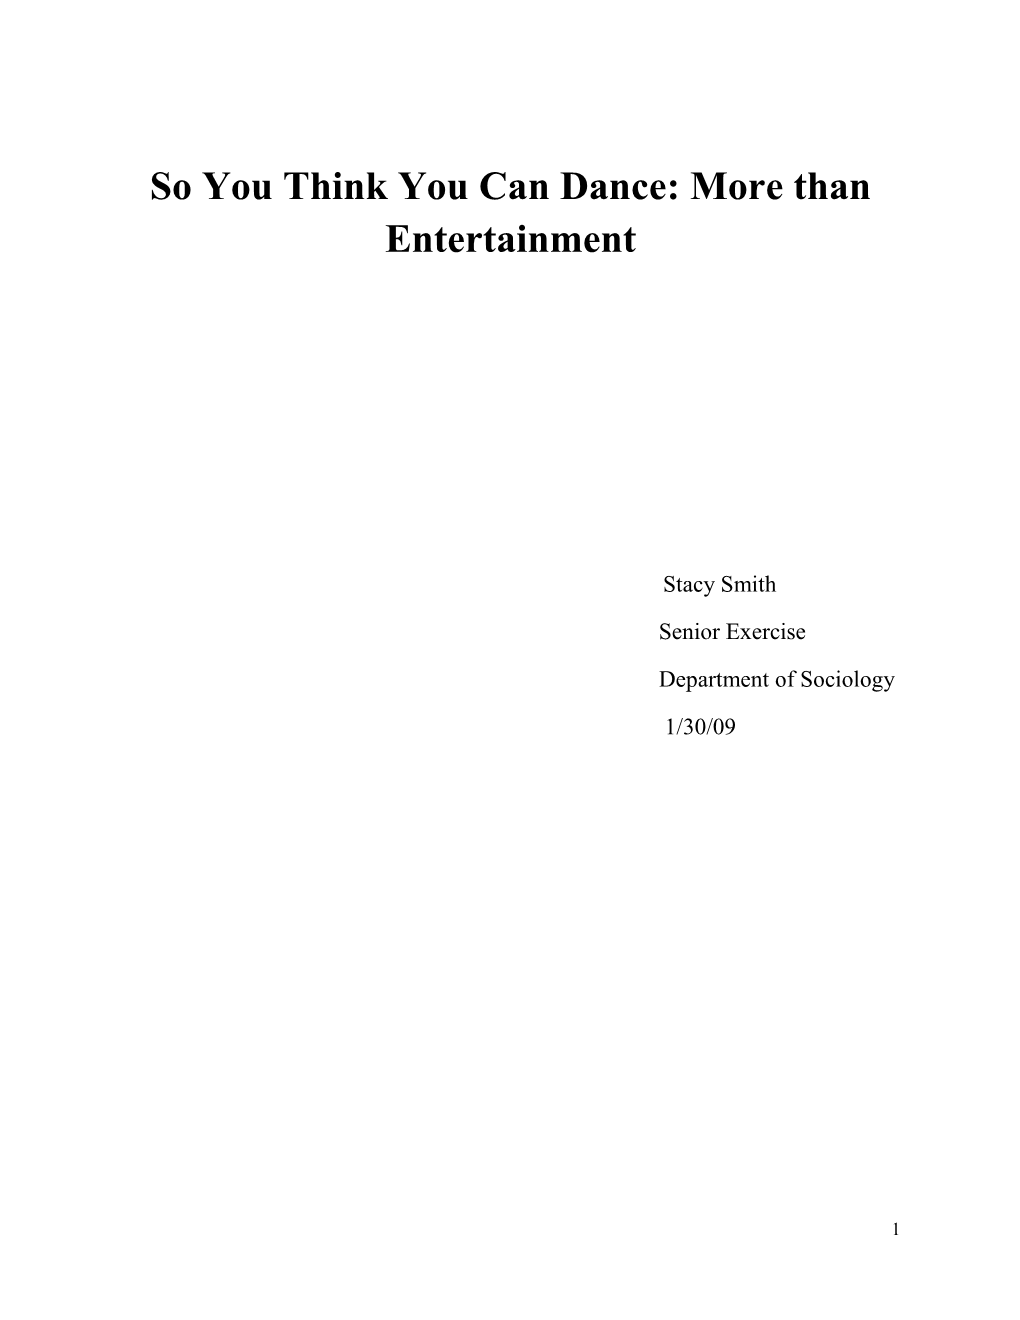 So You Think You Can Dance: More Than